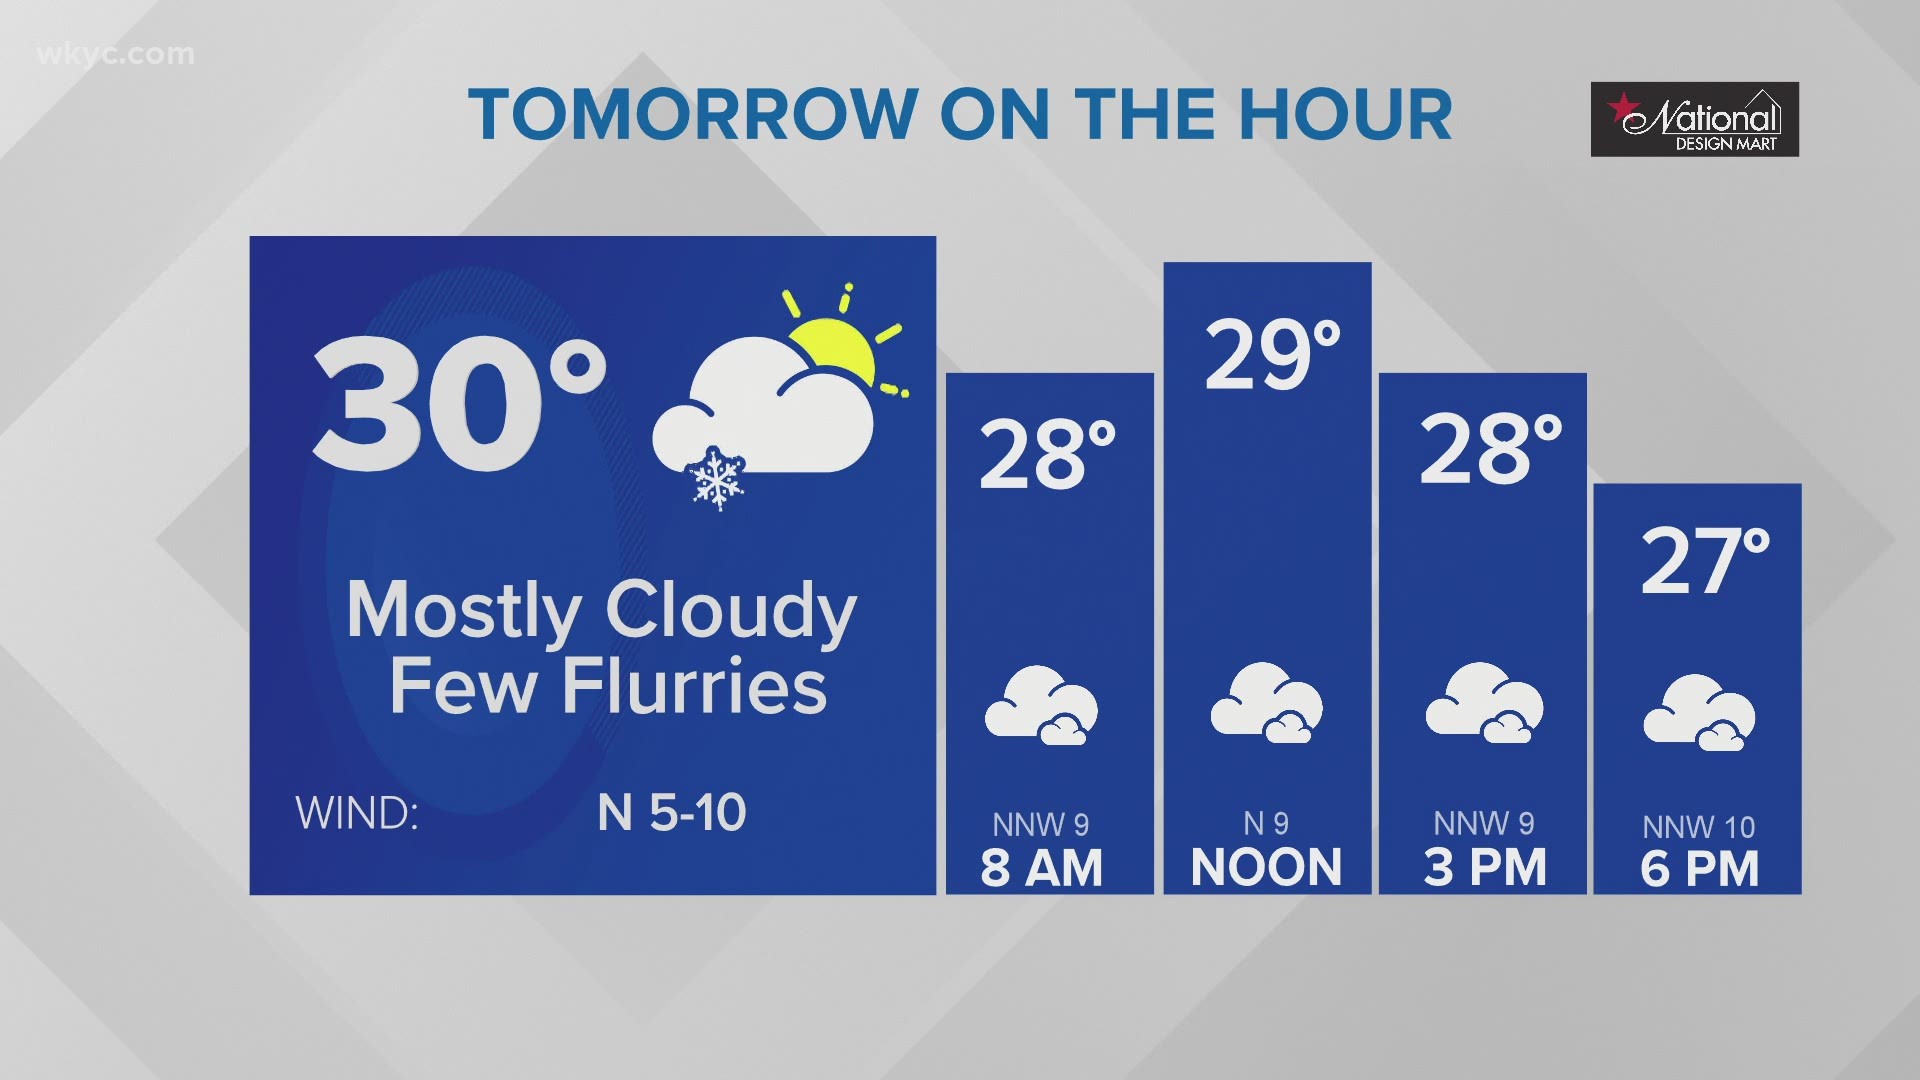 Snow flurries in the mix. Betsy Kling has what to expect overnight and into the morning in her extended forecast.